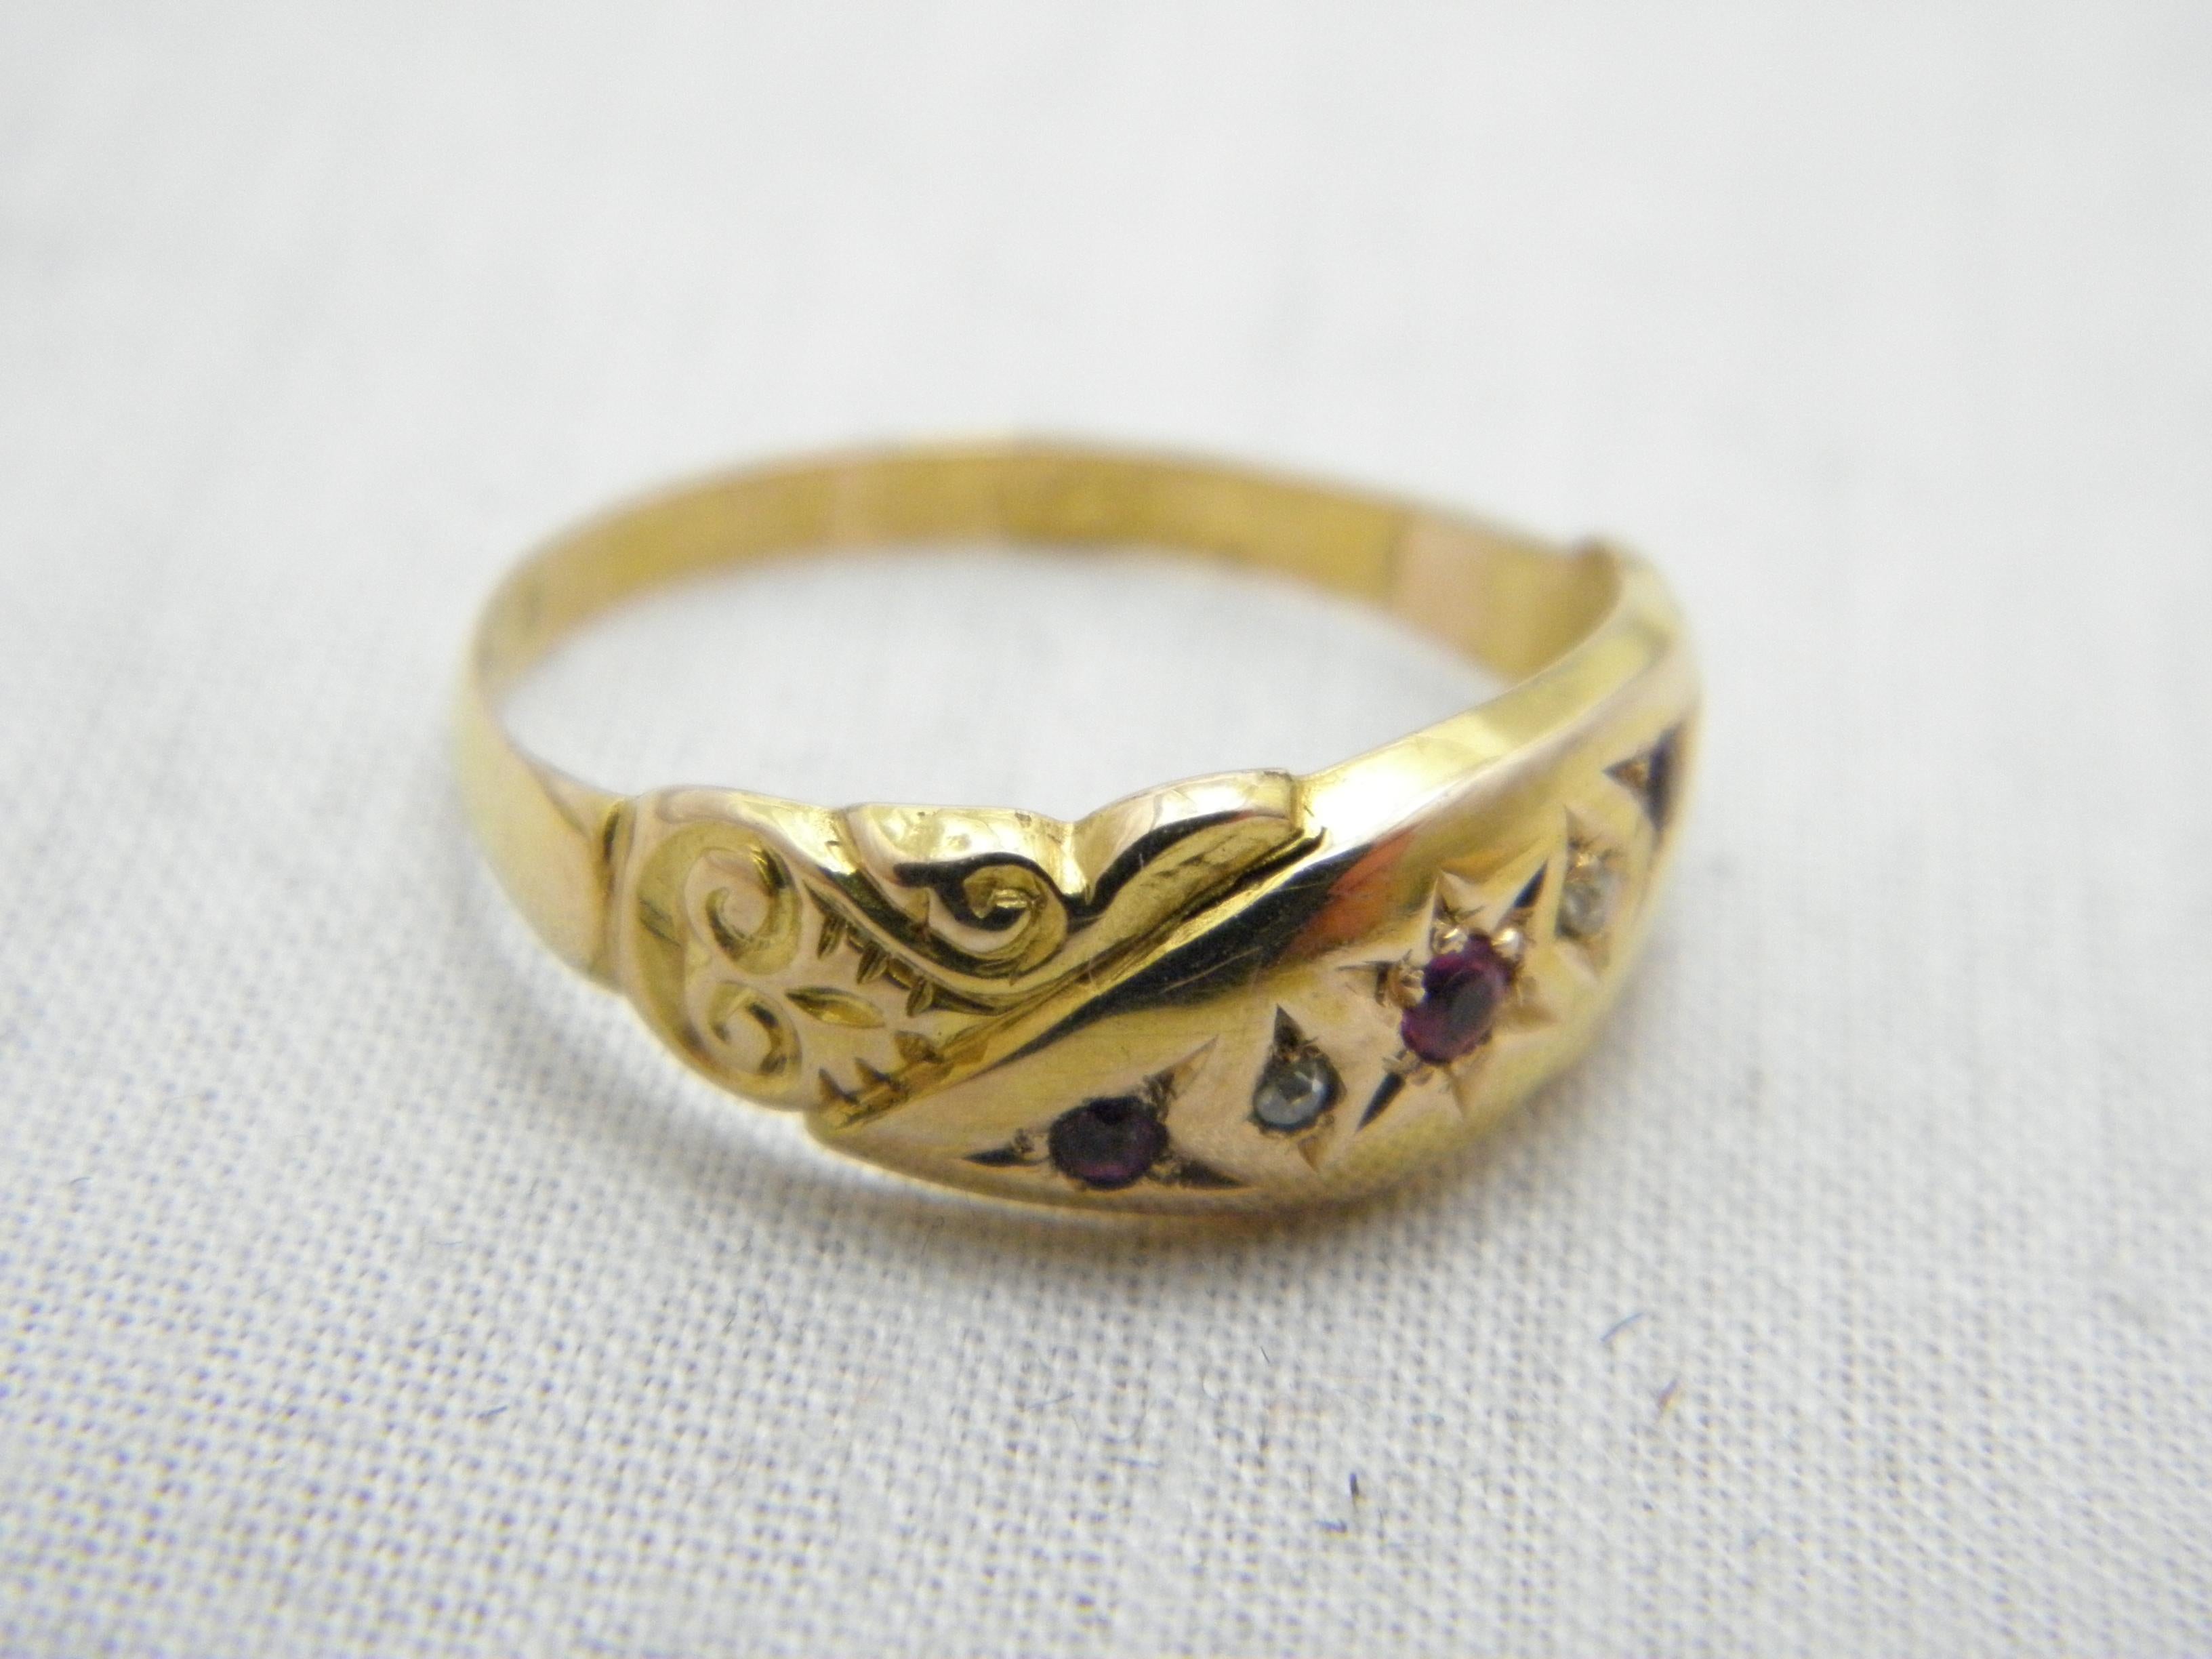 Antique 15ct Gold Ruby Diamond Gypsy Boat Ring Size O 7.25 625 Chester 1910 In Good Condition For Sale In Camelford, GB